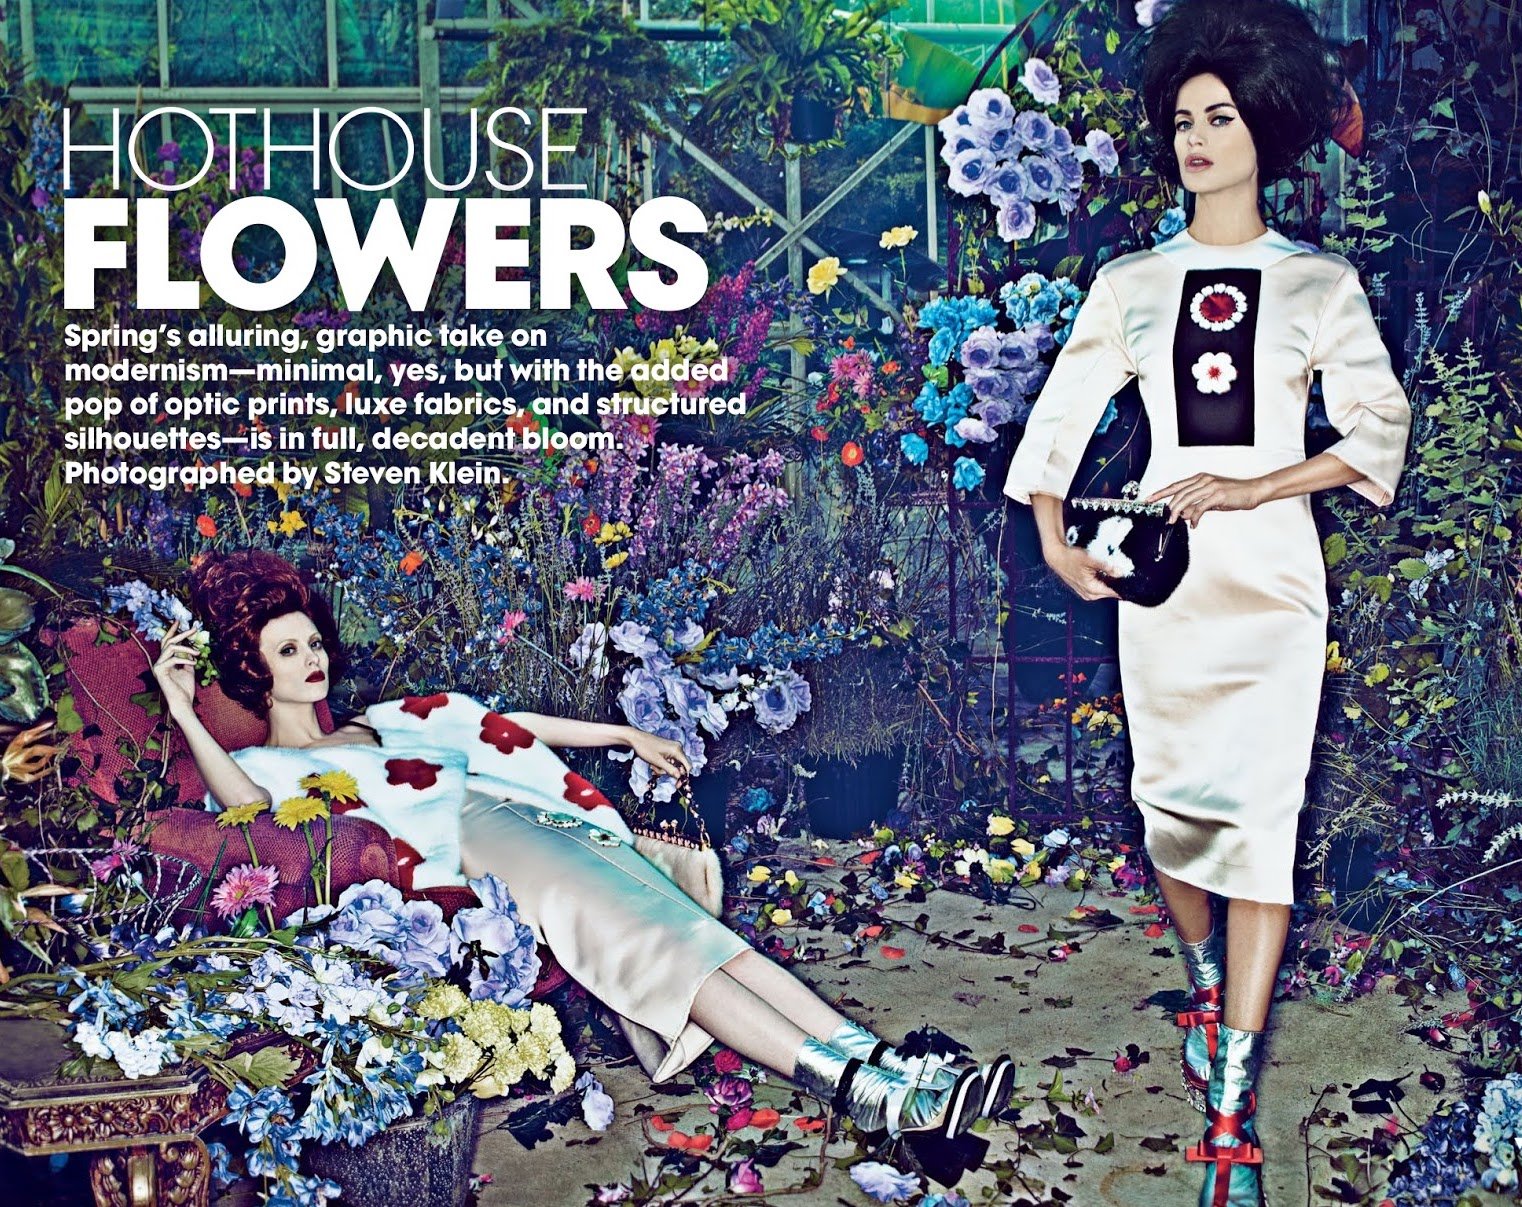 Hothouse-Flowers-by-Steven-Klein-Vogue-US-2012-00001.jpg